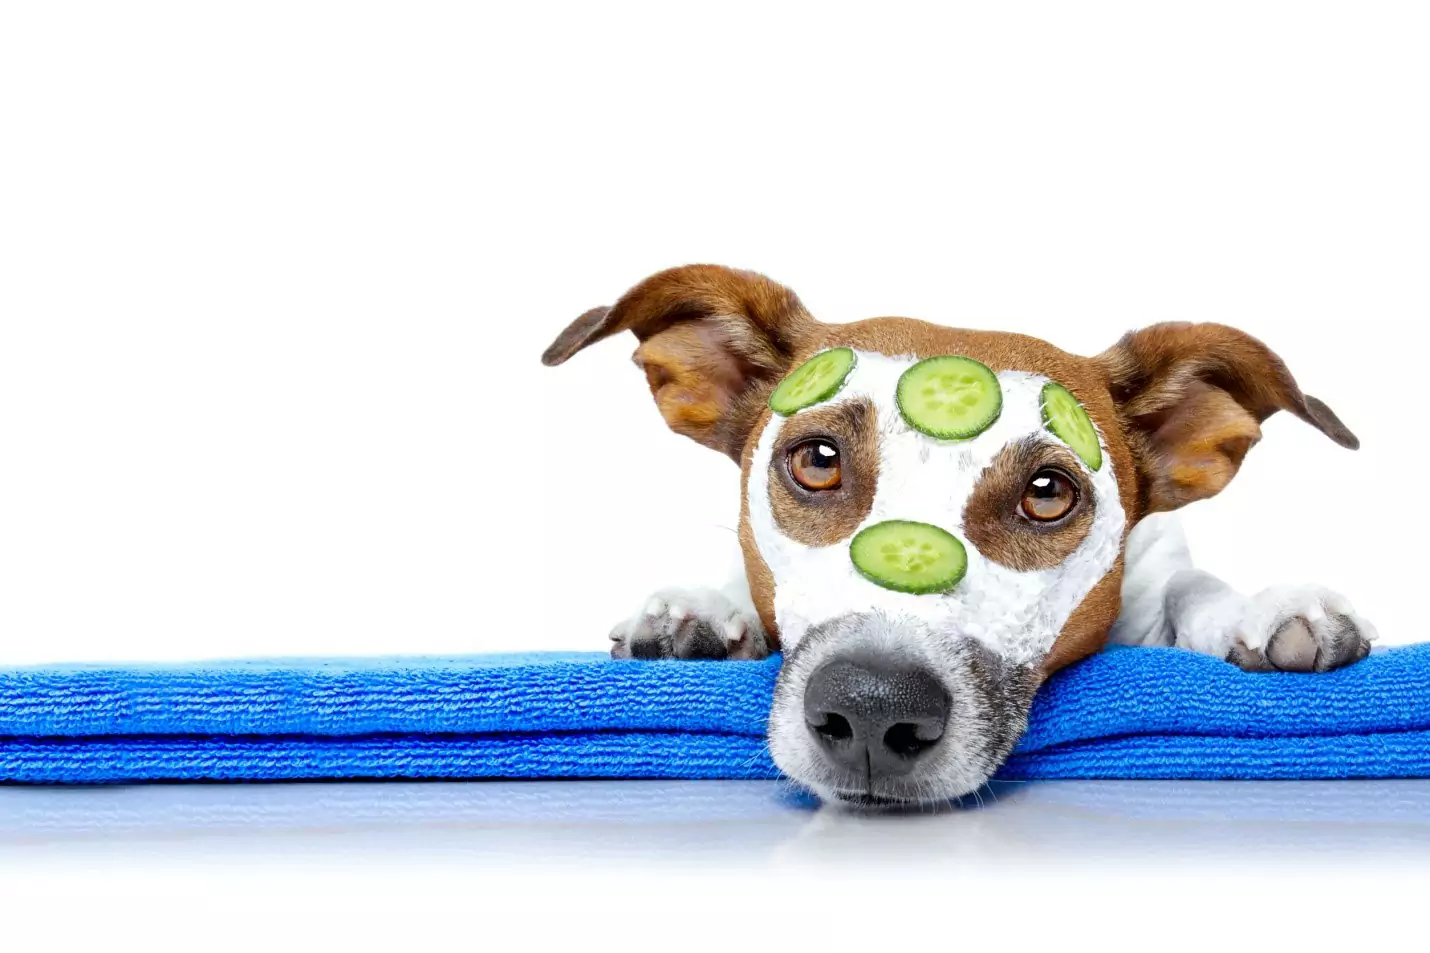 Can dogs eat cucumbers? What are the benefits of giving cucumbers to dogs?